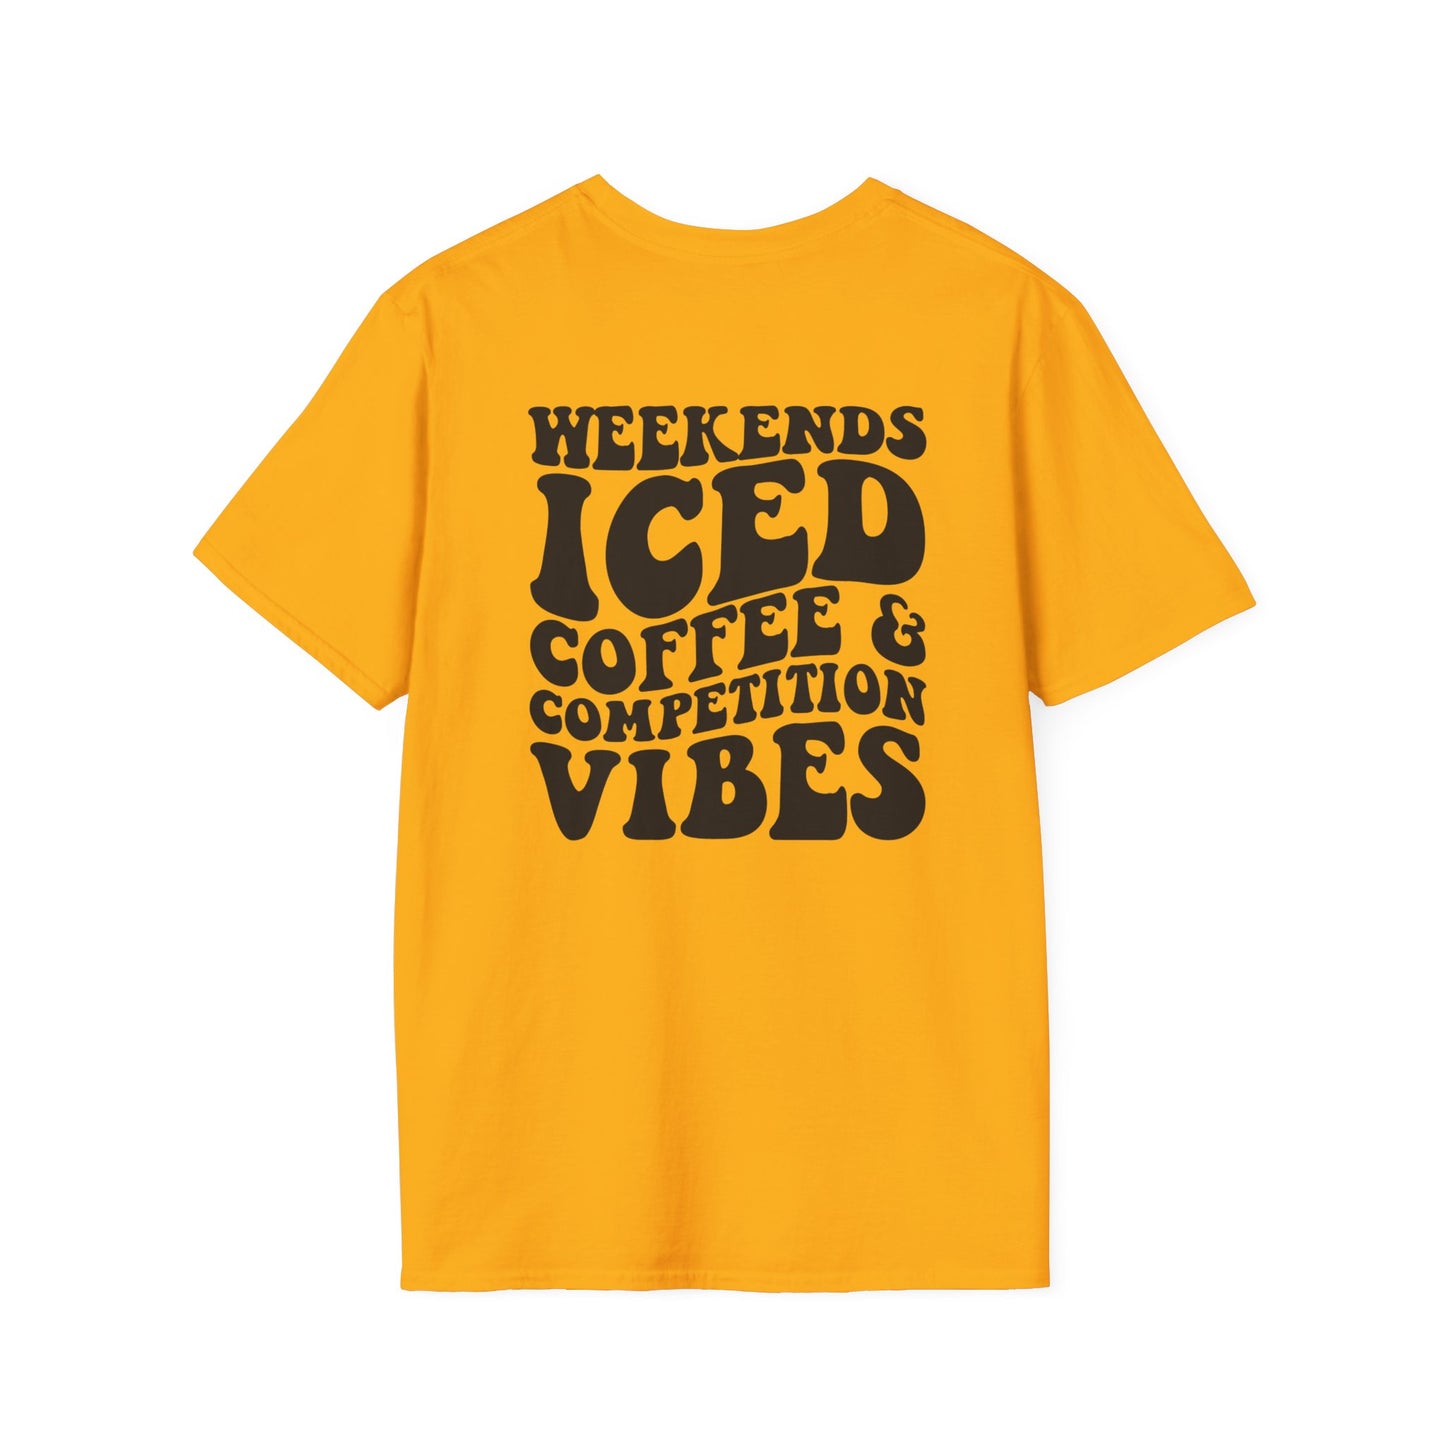 Weekends Ice Coffee Comp Vibes - Unisex Softstyle T-Shirt